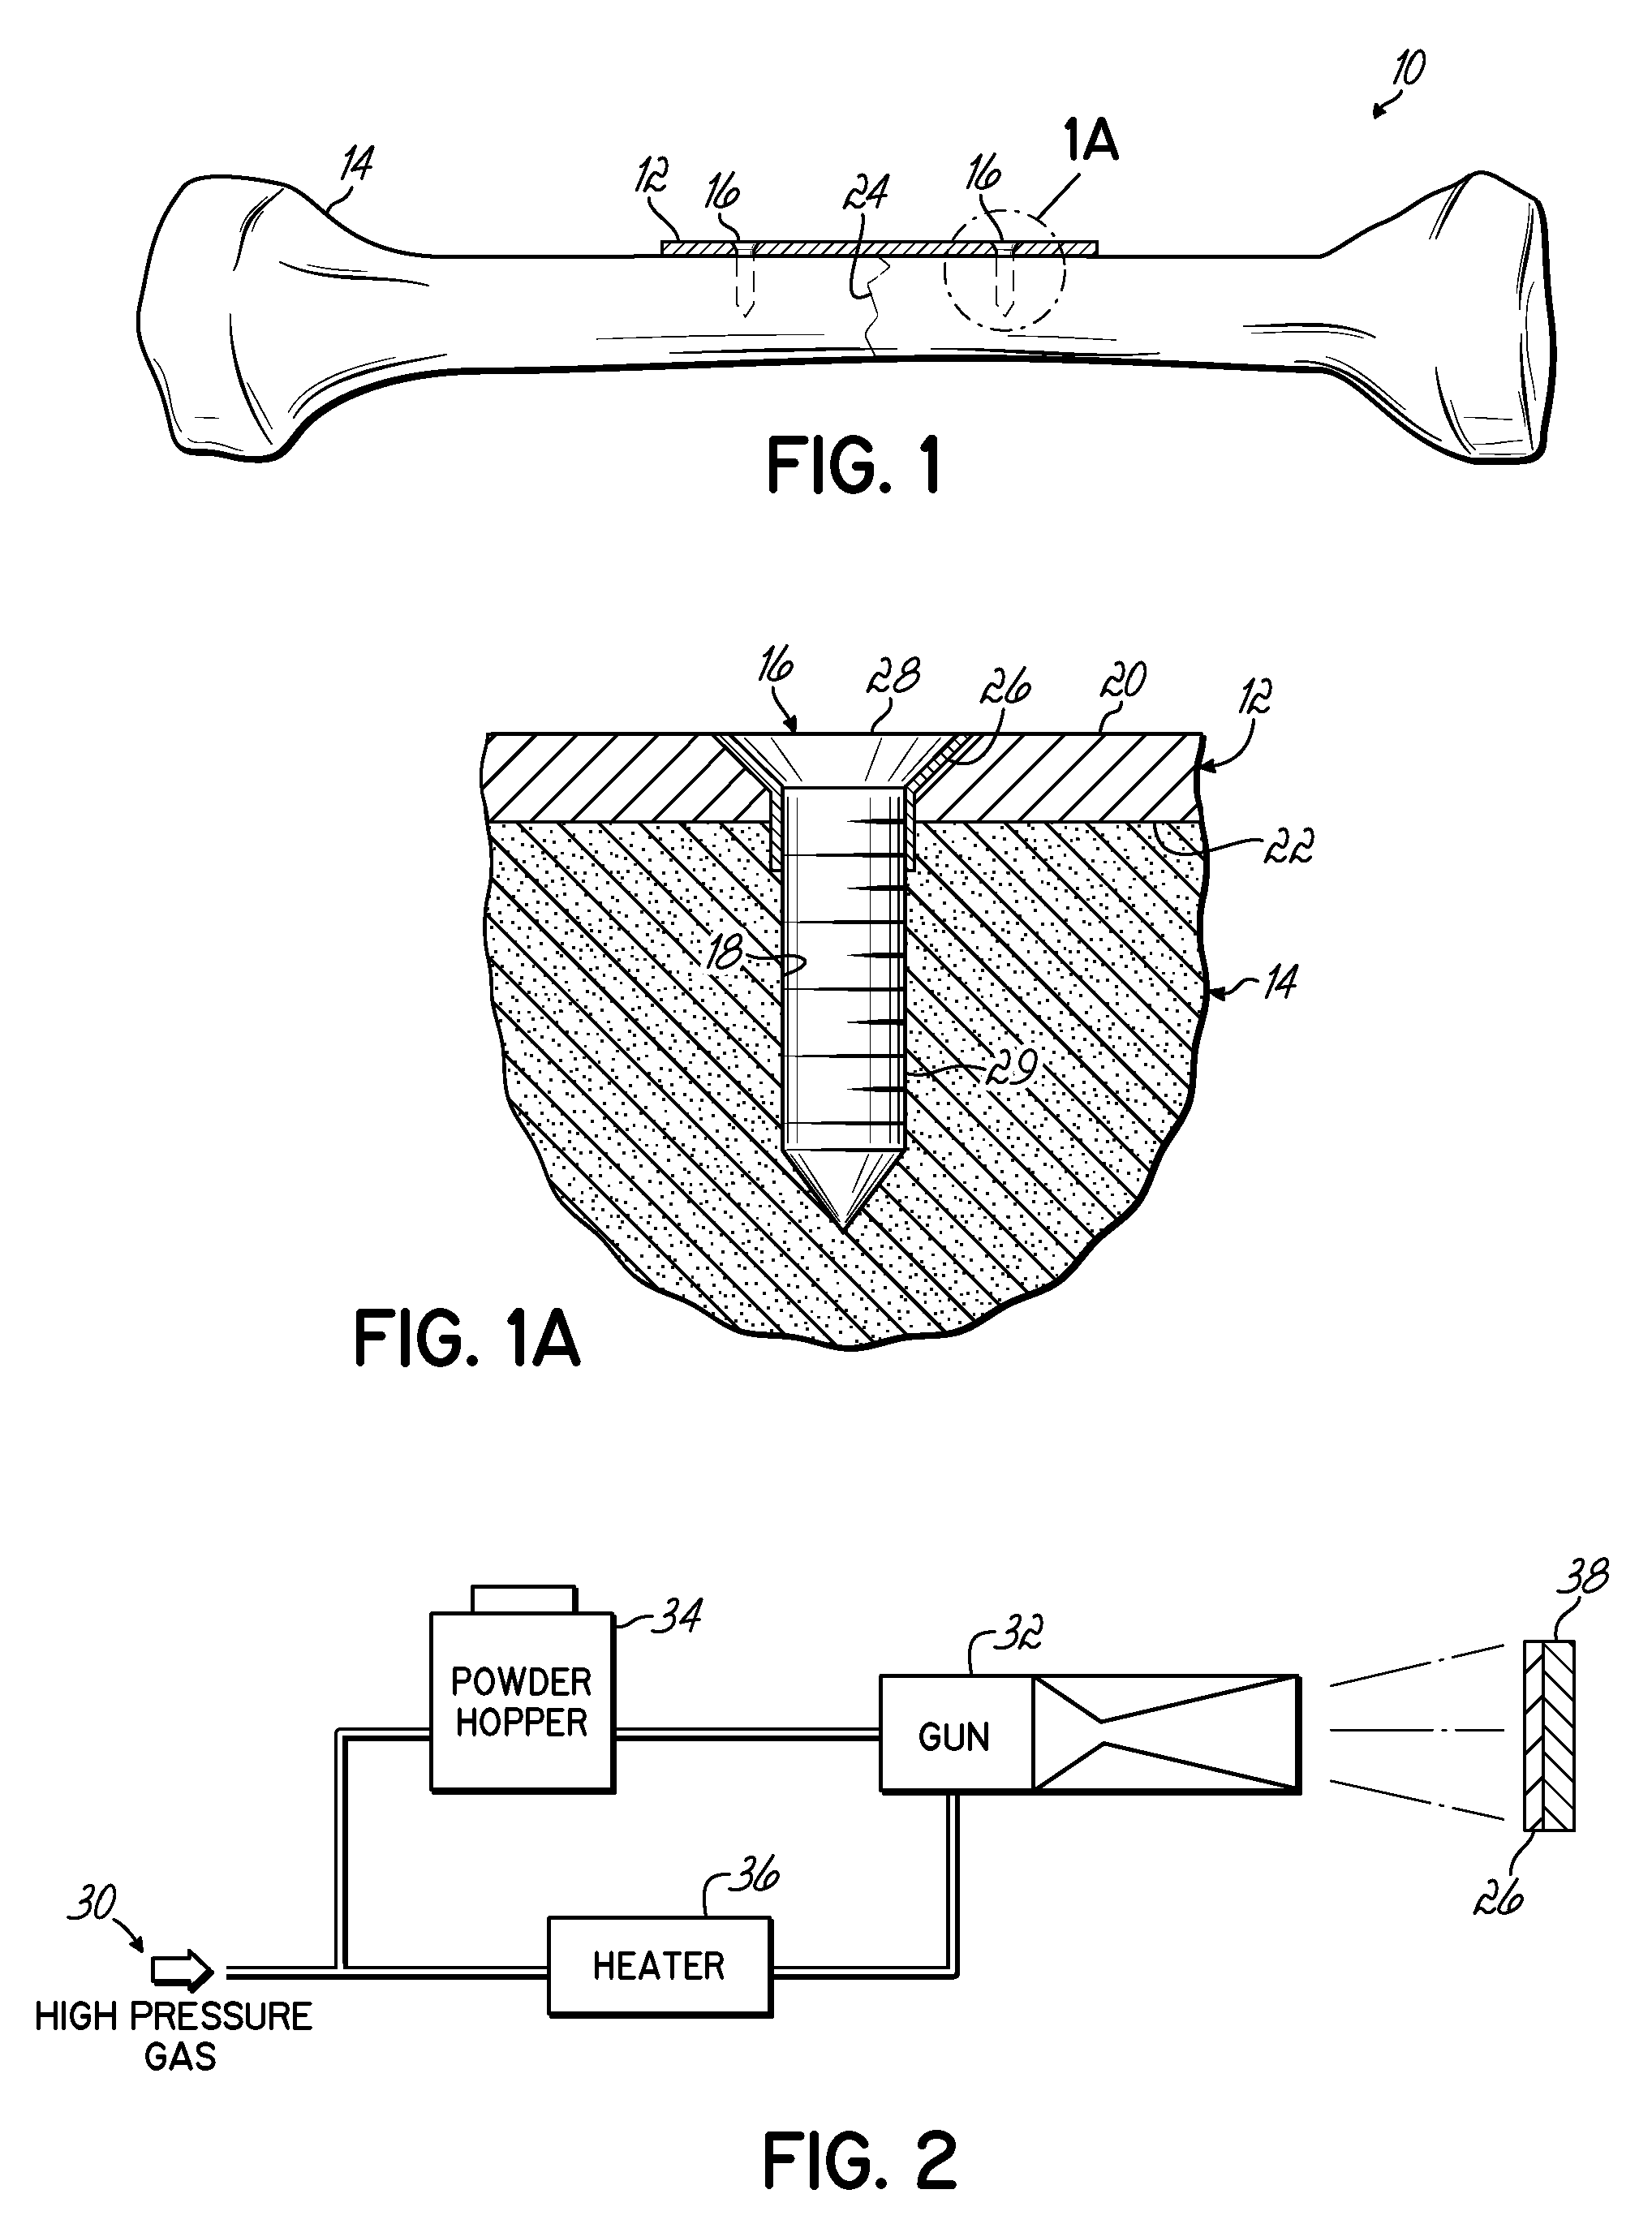 Bone fracture fixation system